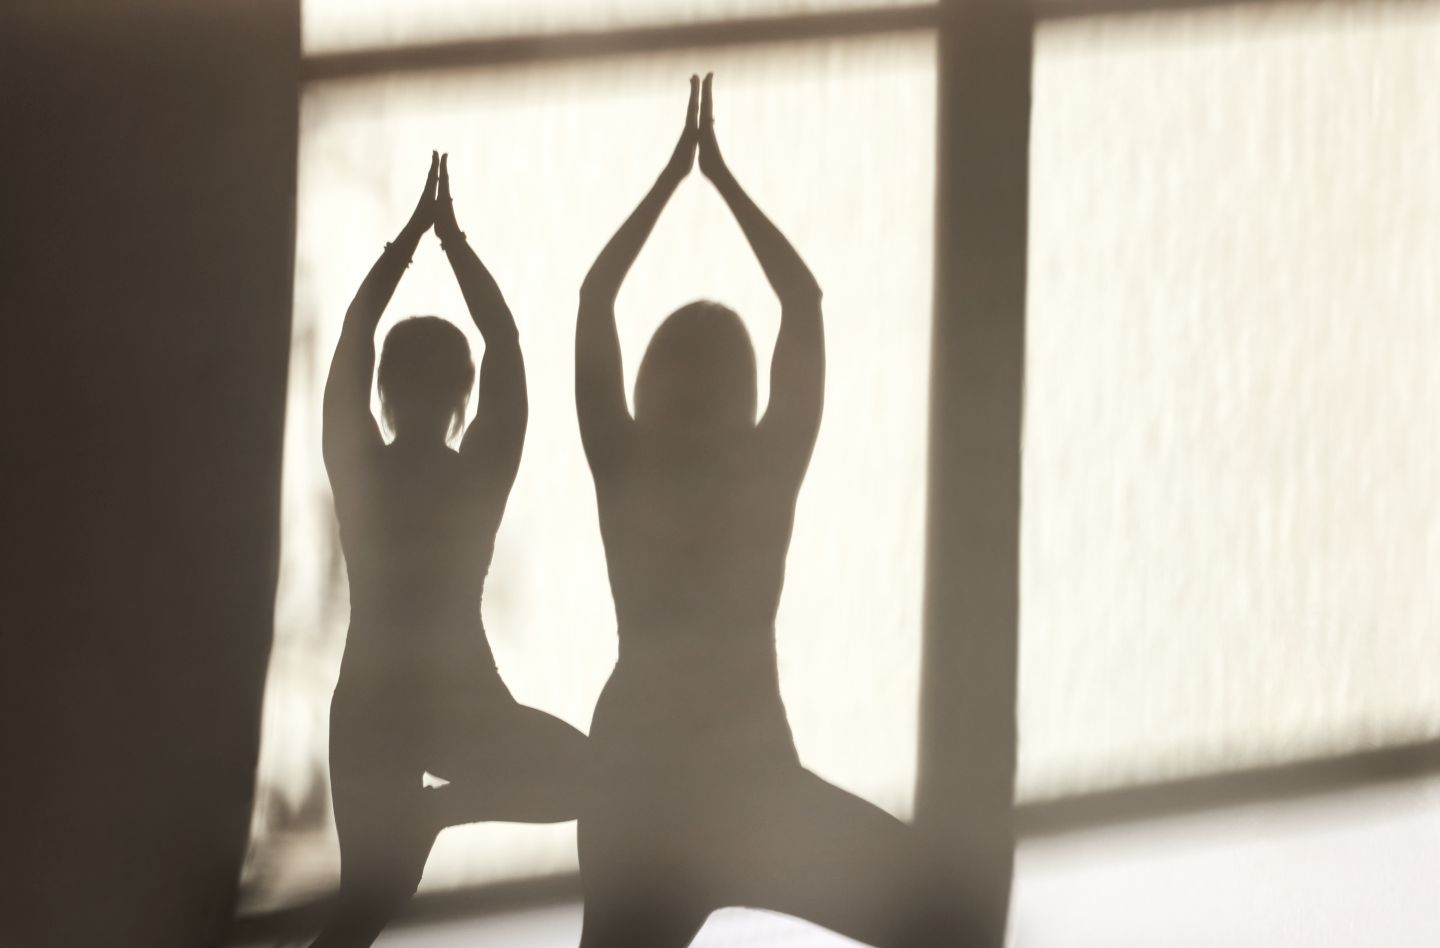 shadows of two people practicing yoga